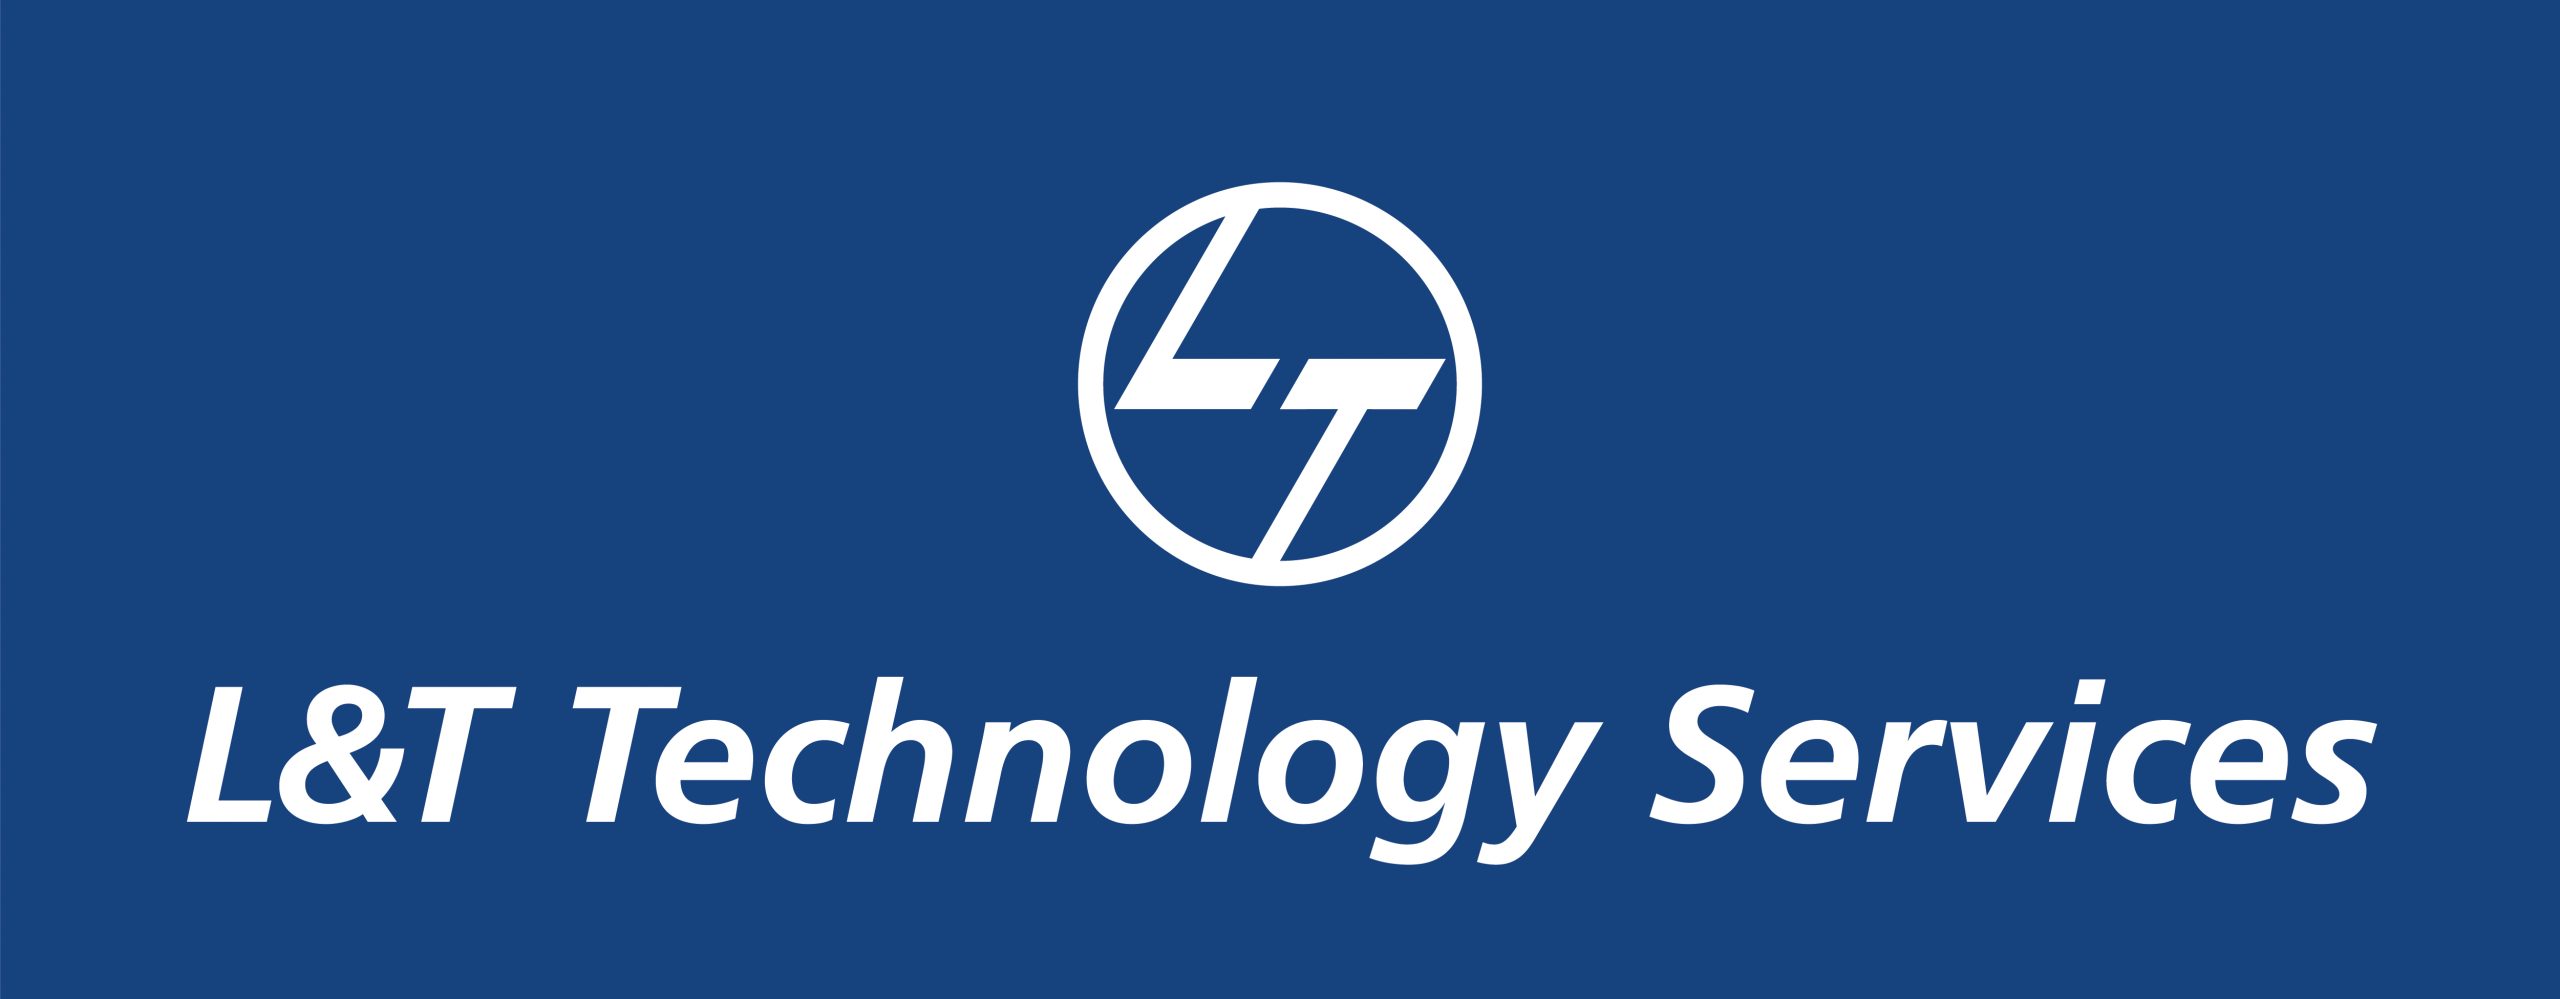 LT Technology Services Limited scaled